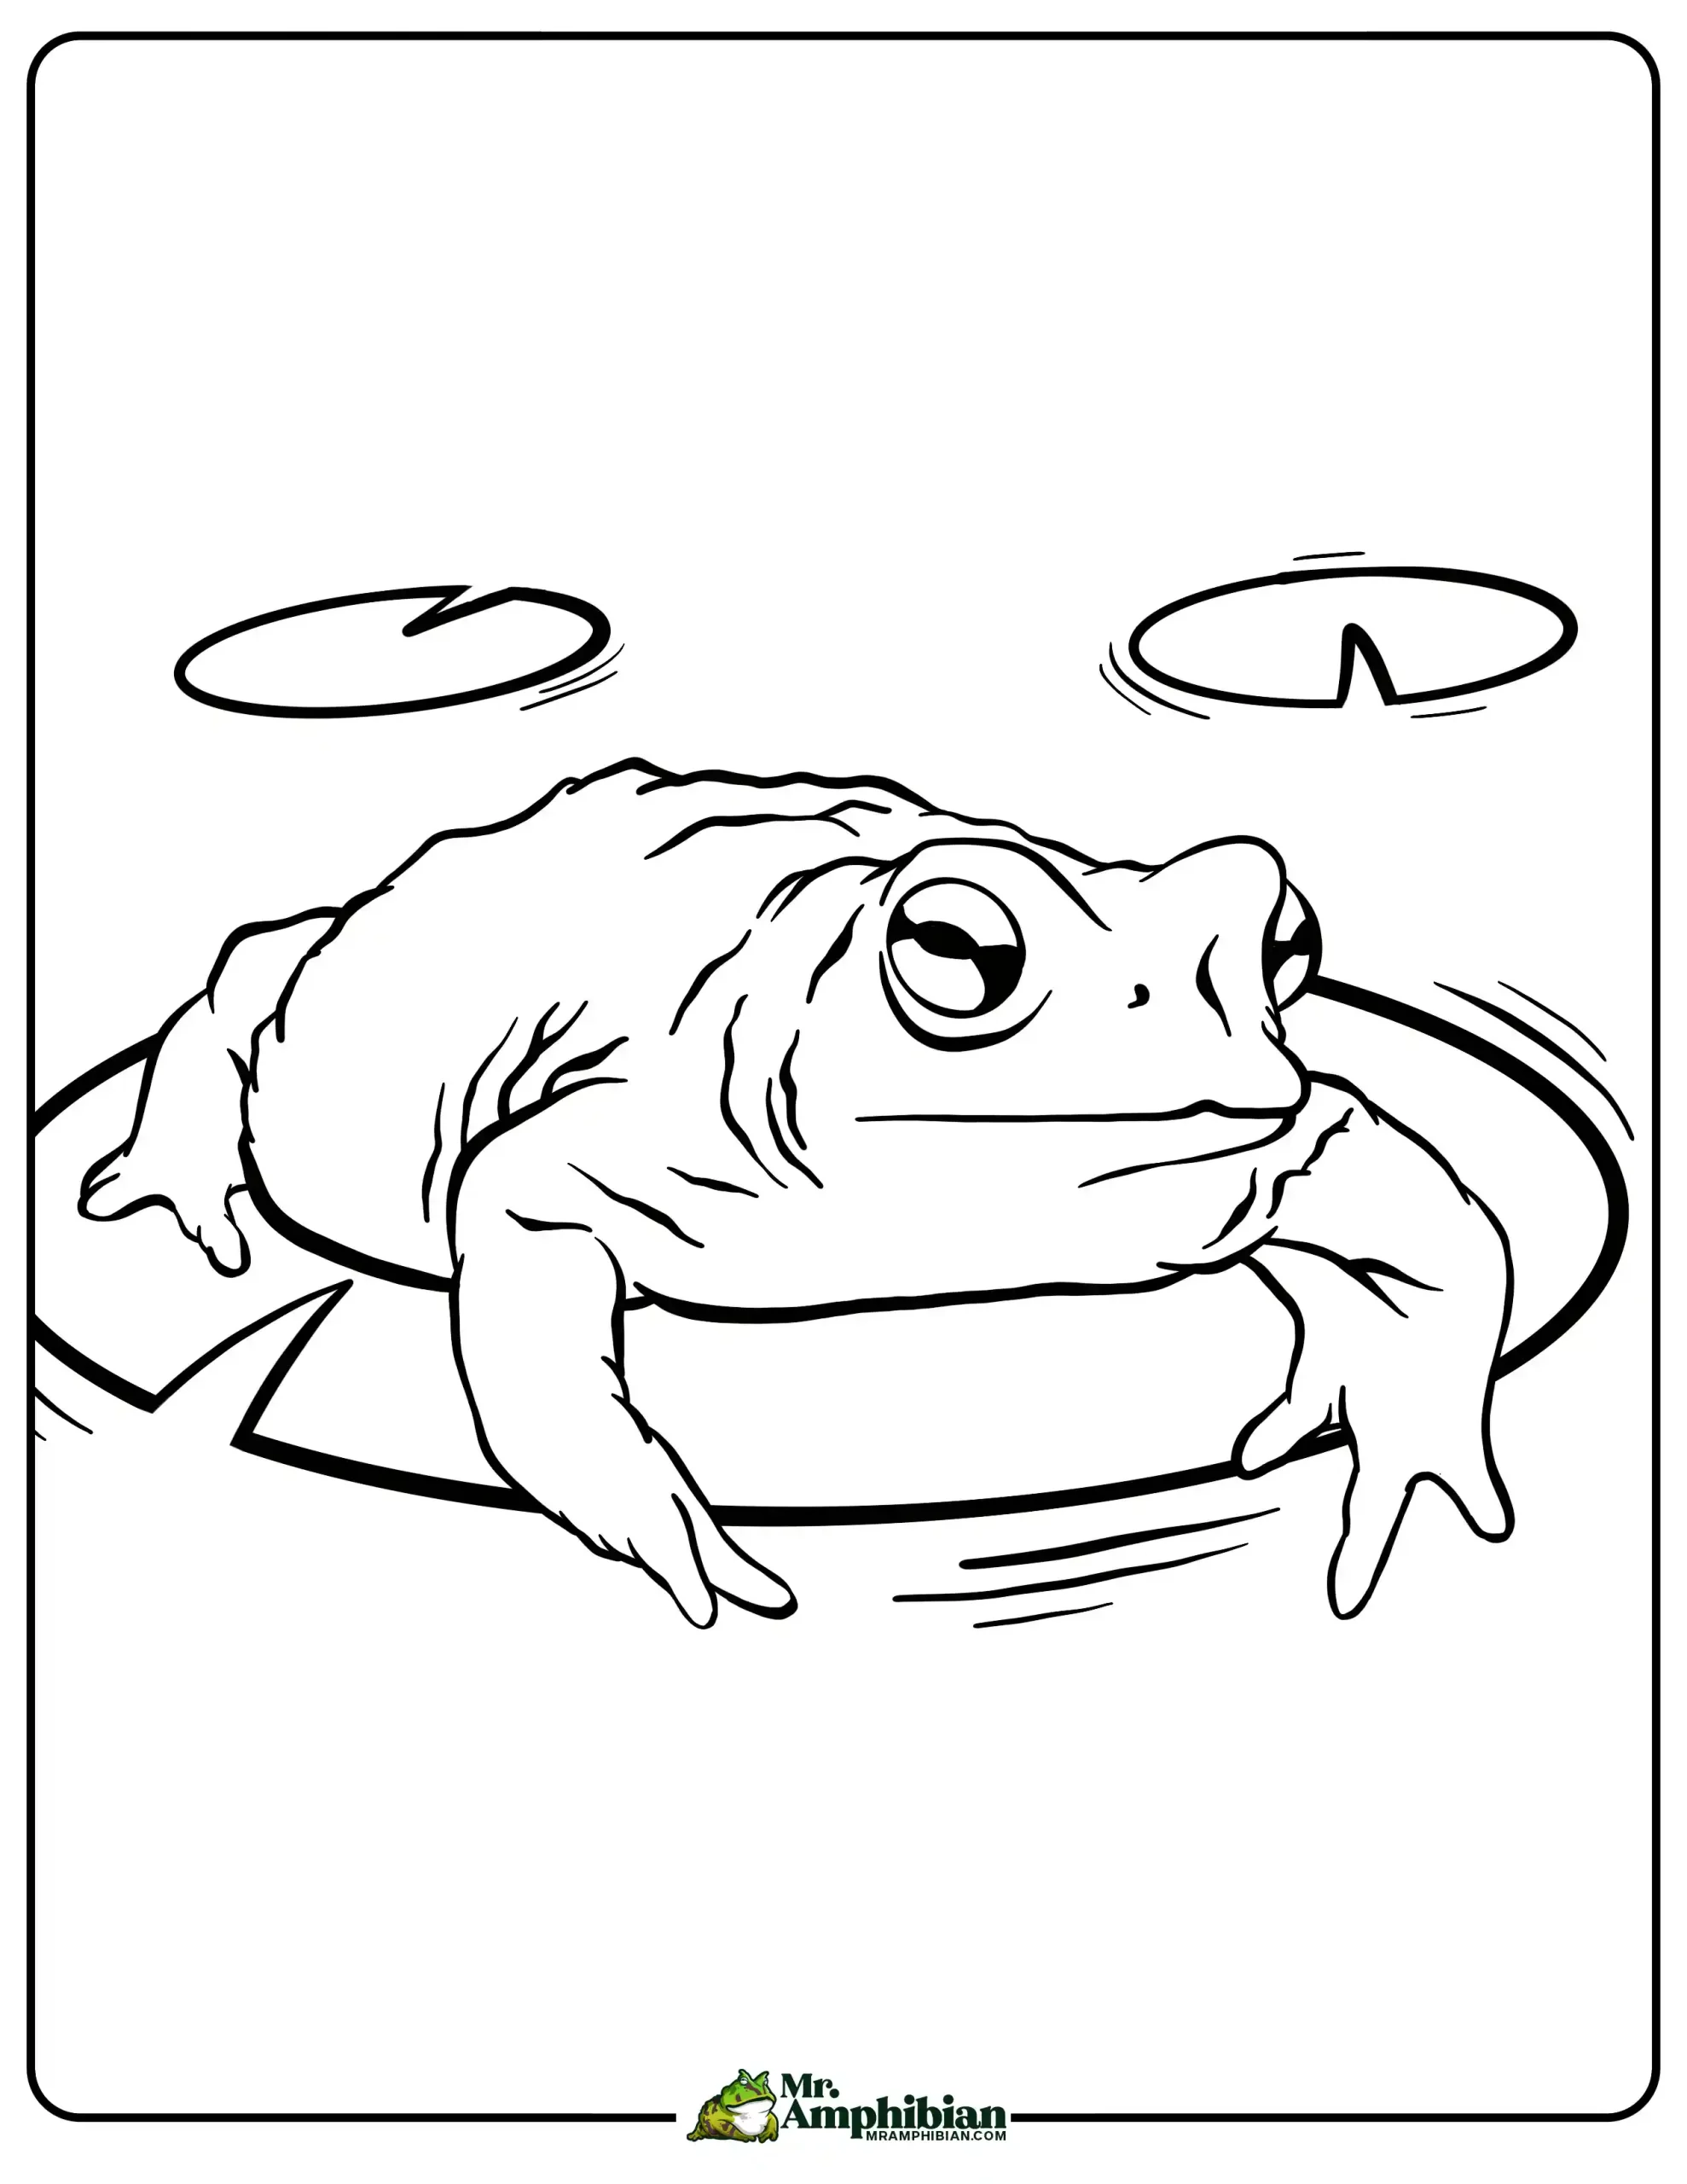 Frog coloring pages printable